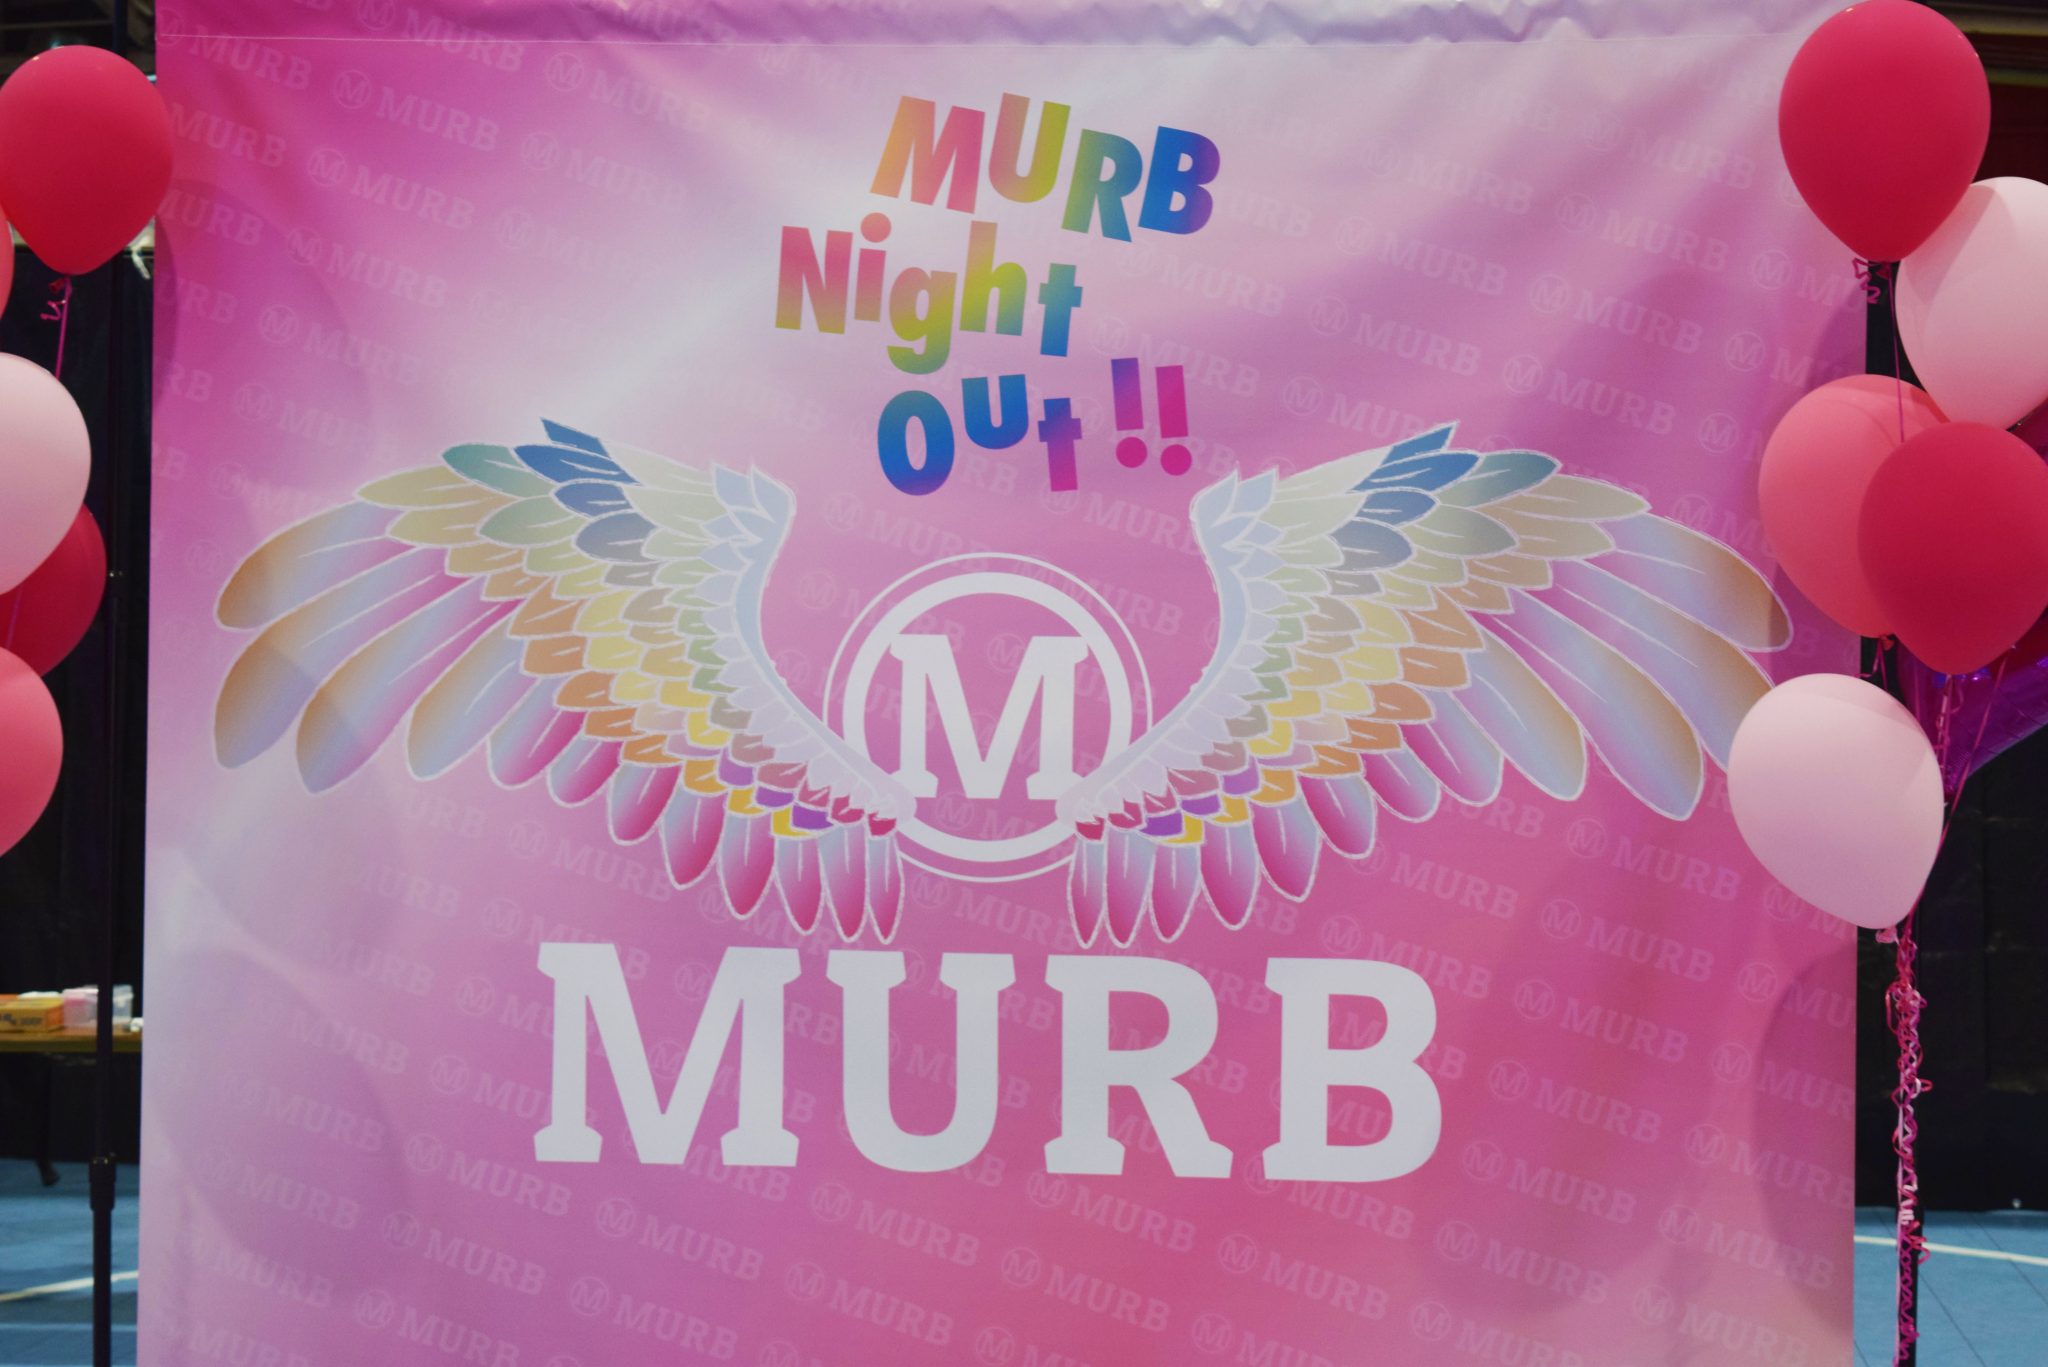 MURB Night Out!!ロゴマーク